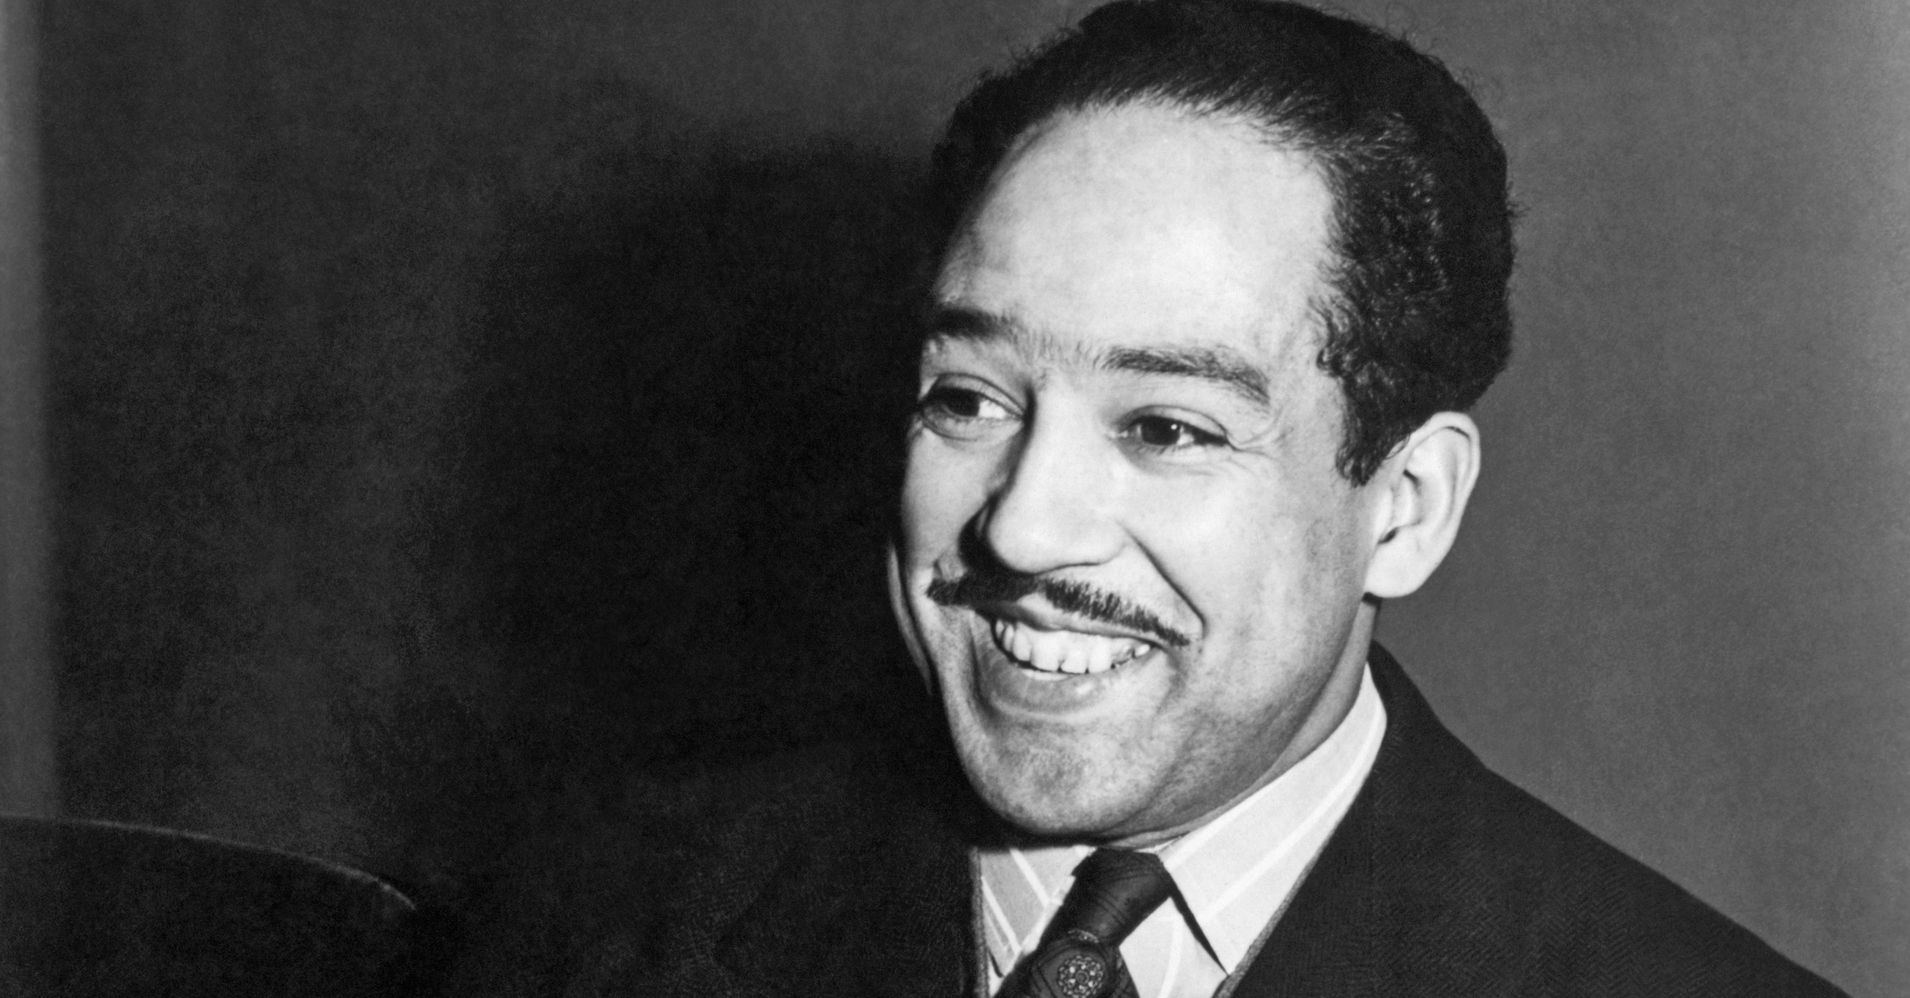 This is a photo of Langston Hughes